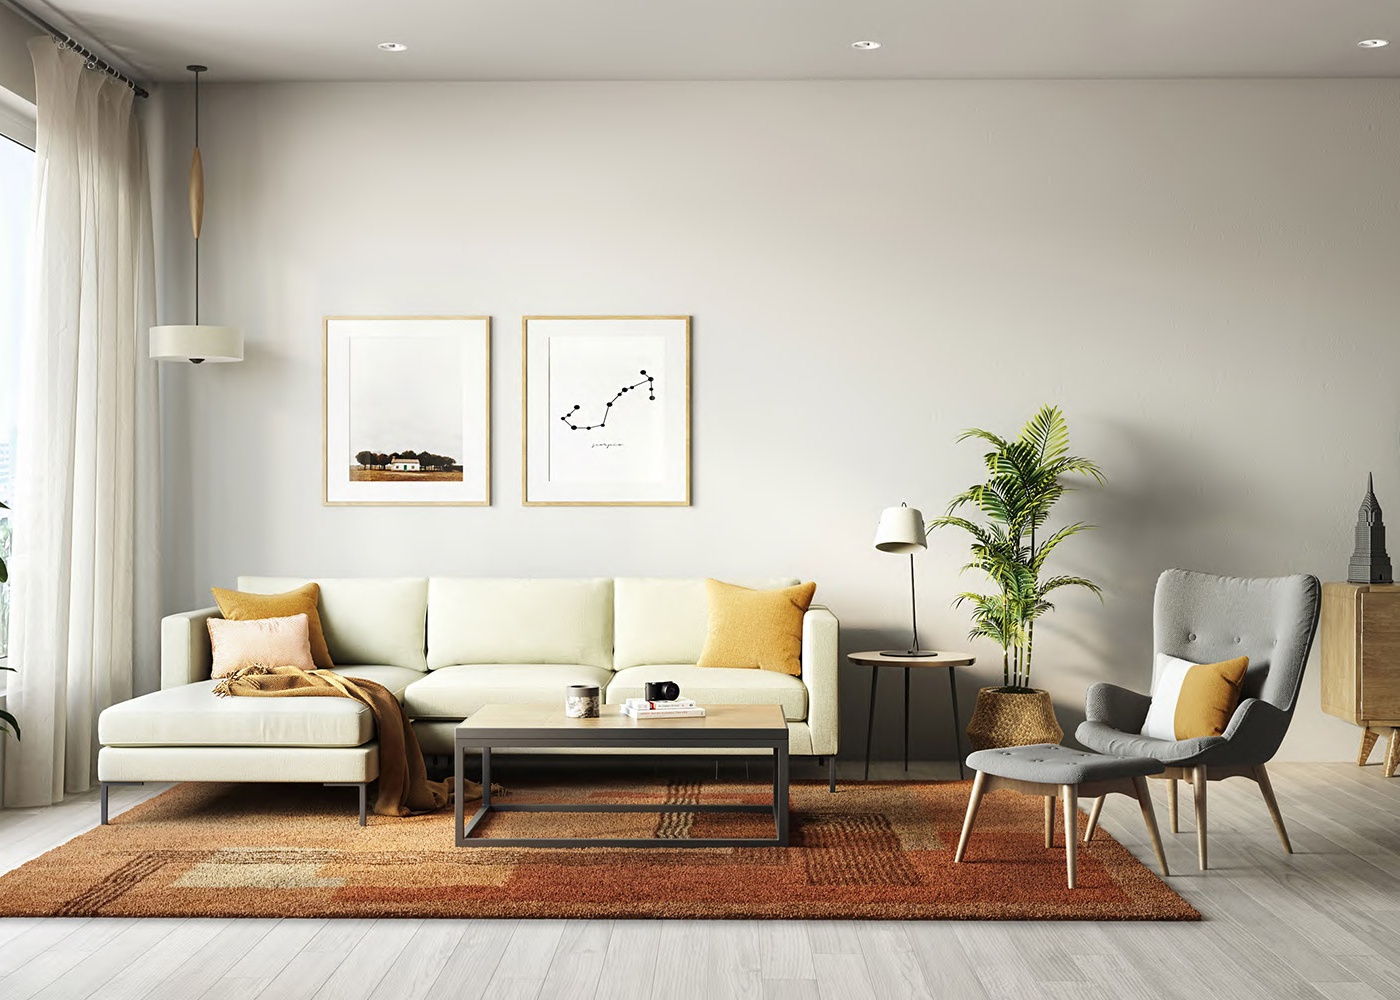 Livspace, a Leading Home Interiors and Renovations Platform, Invests ...